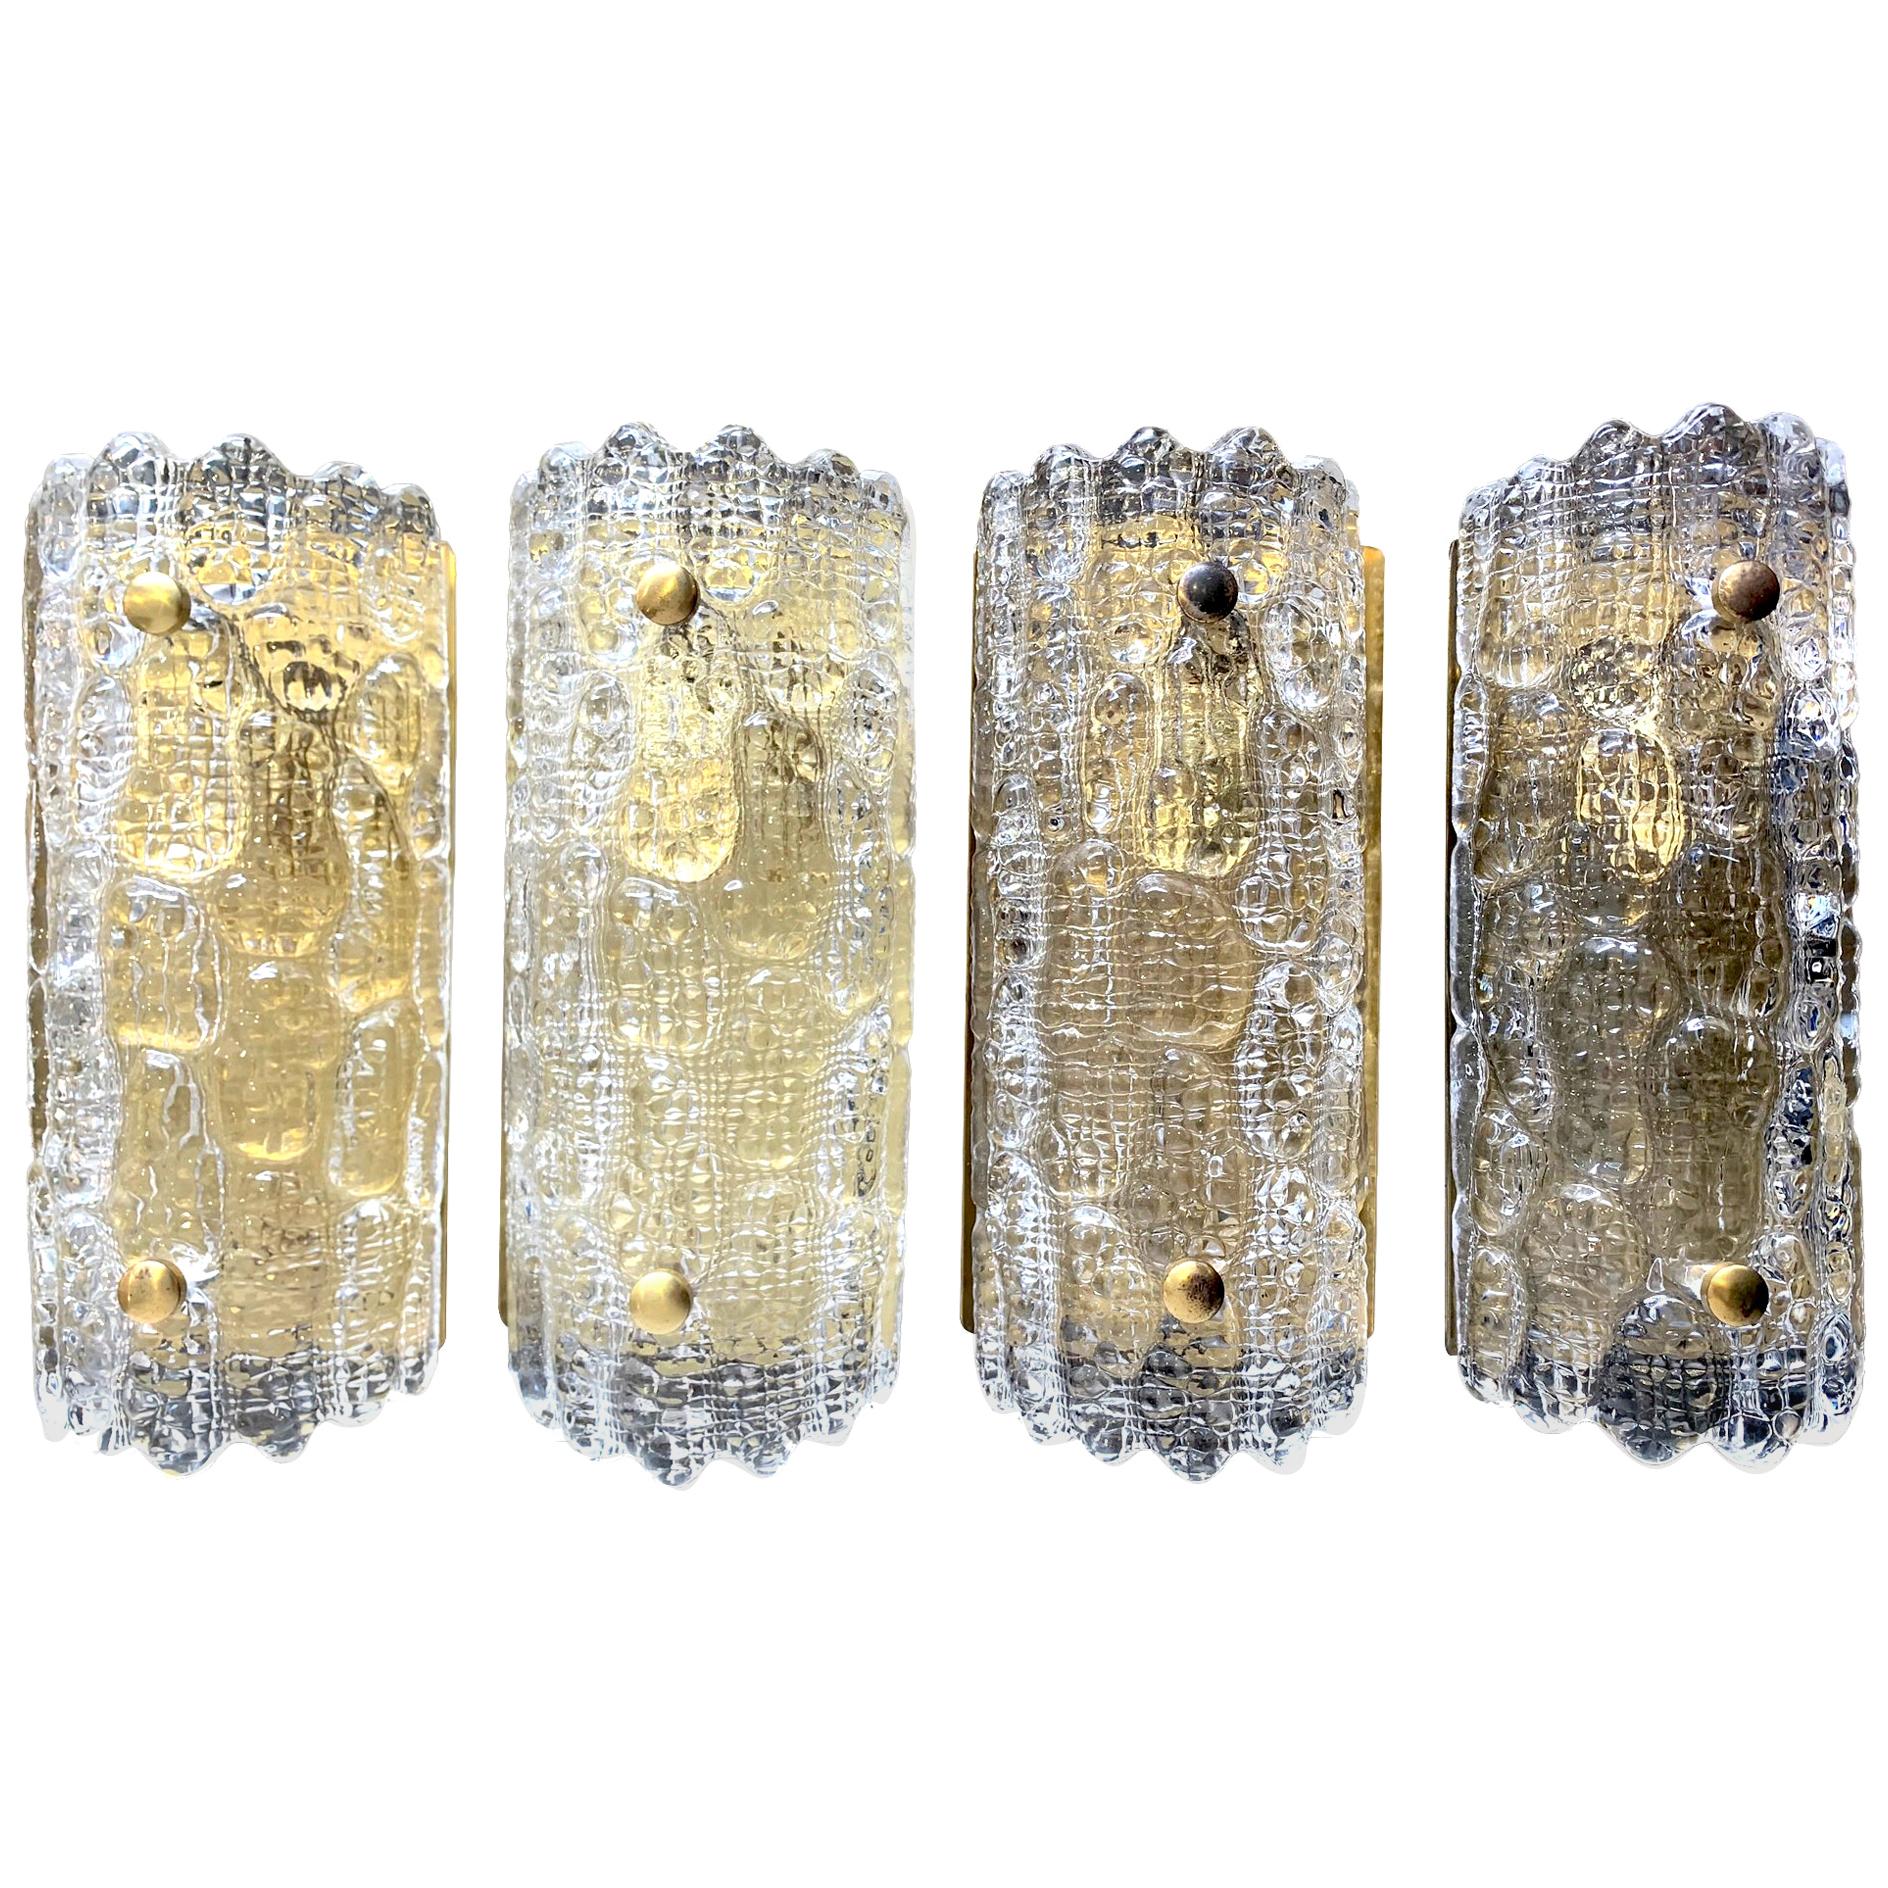 A pair of Orrefors Glass Wall Sconces with Brass Plates by Carl Fagerlund